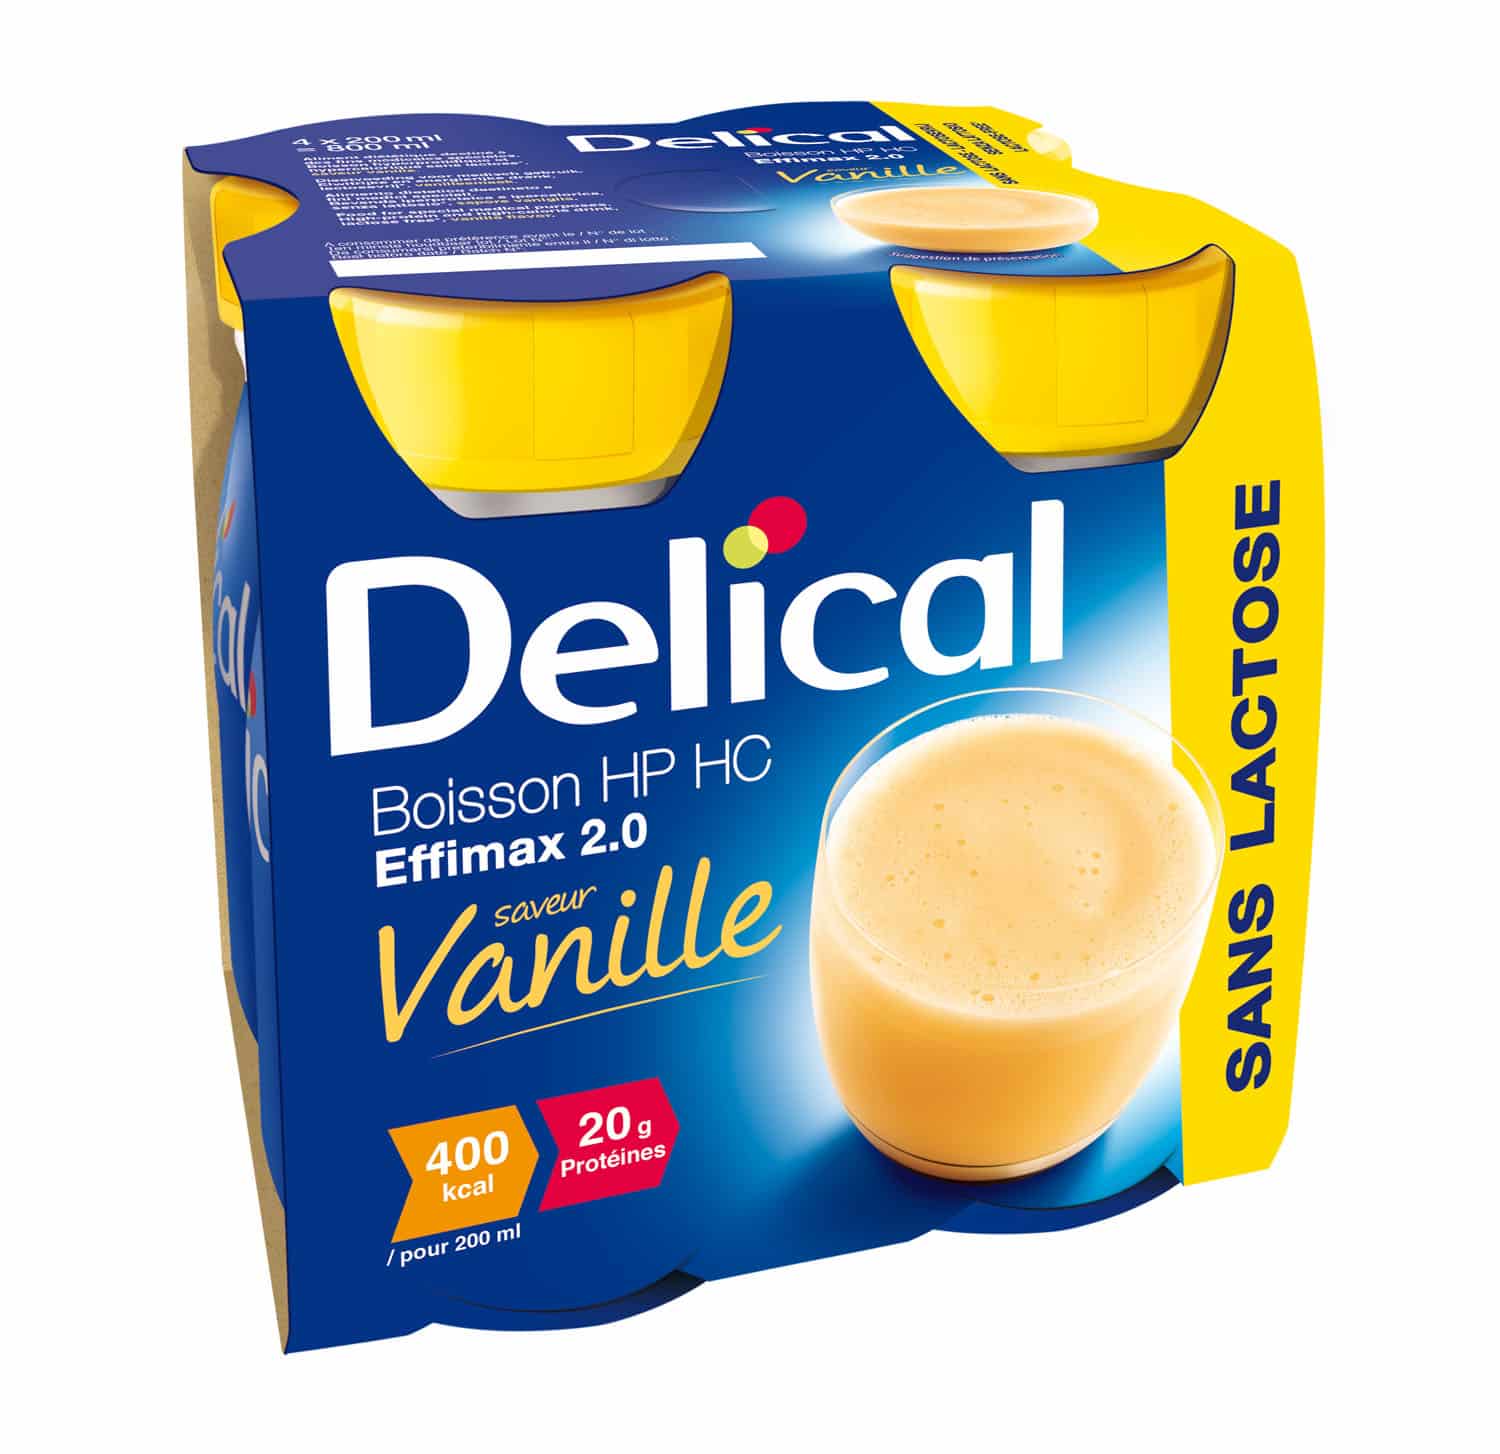 Delical Effimax 2.0 Vanille